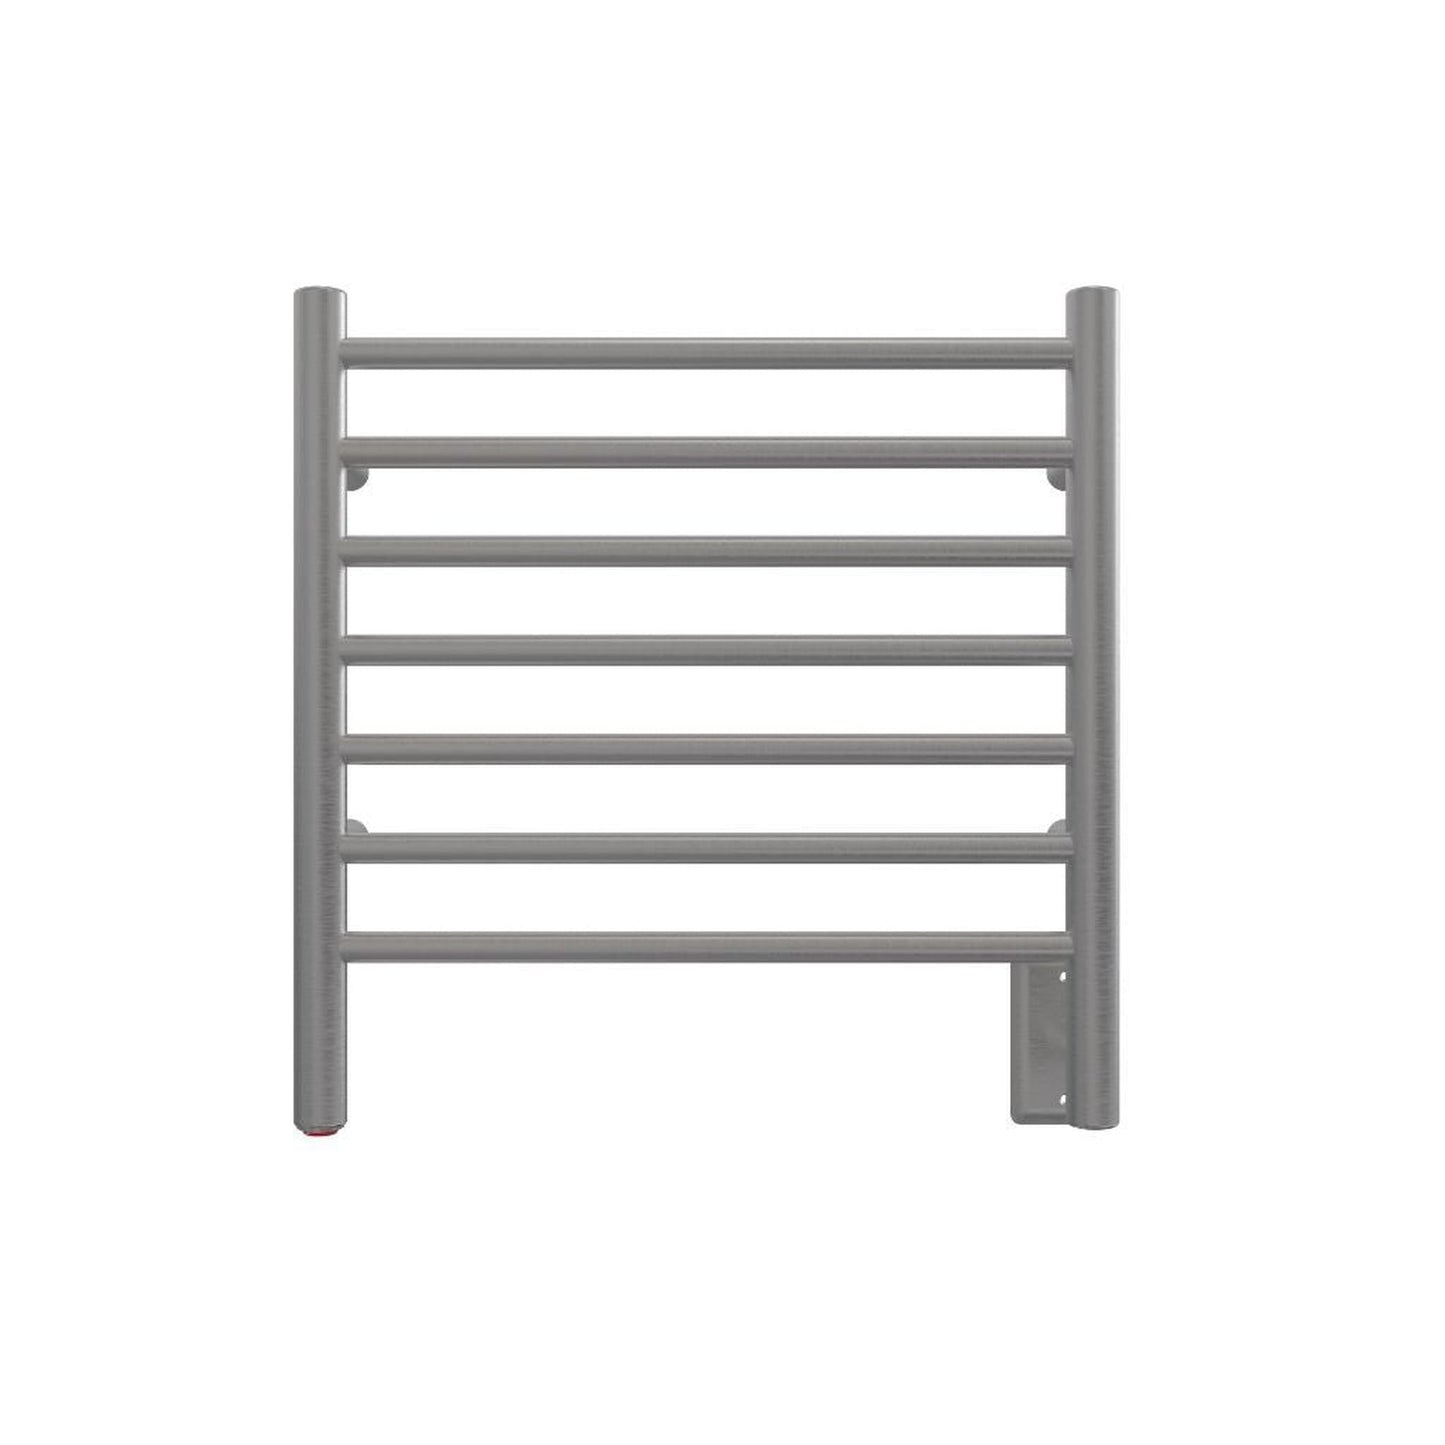 Amba Radiant Small 7-Bar Brushed Stainless Steel Plug-In Towel Warmer